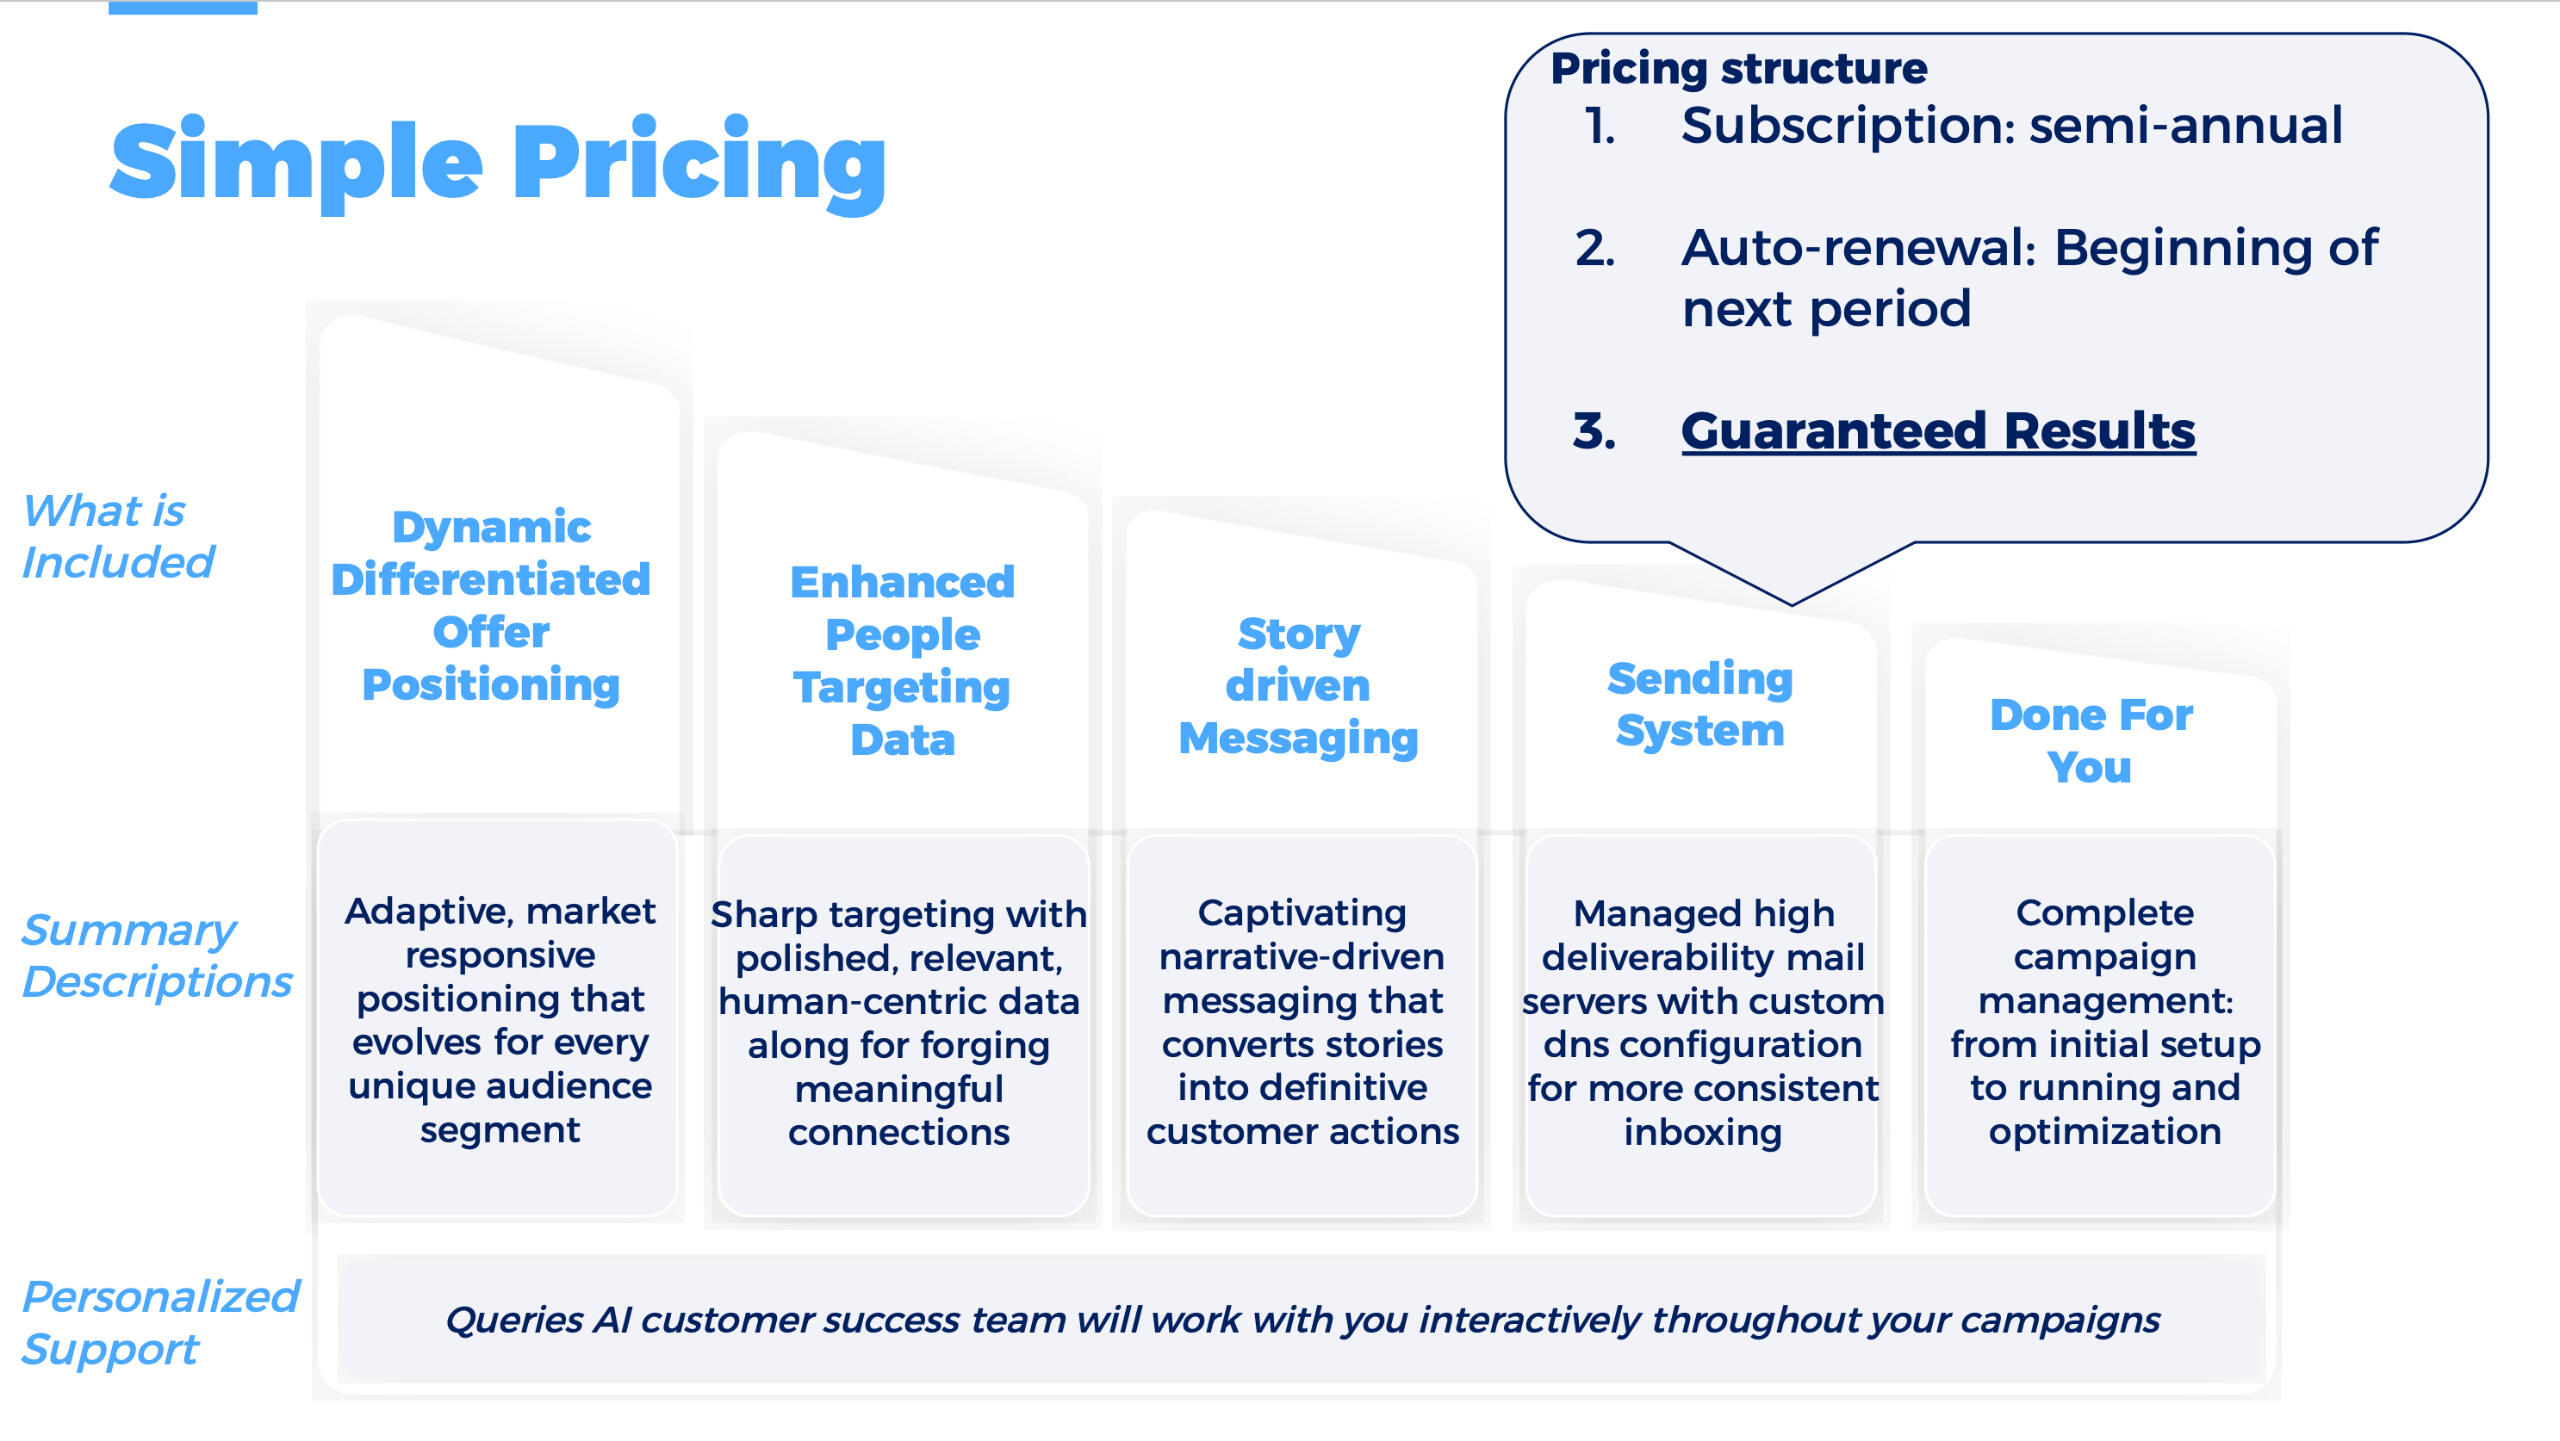 Pricing by Queries AI